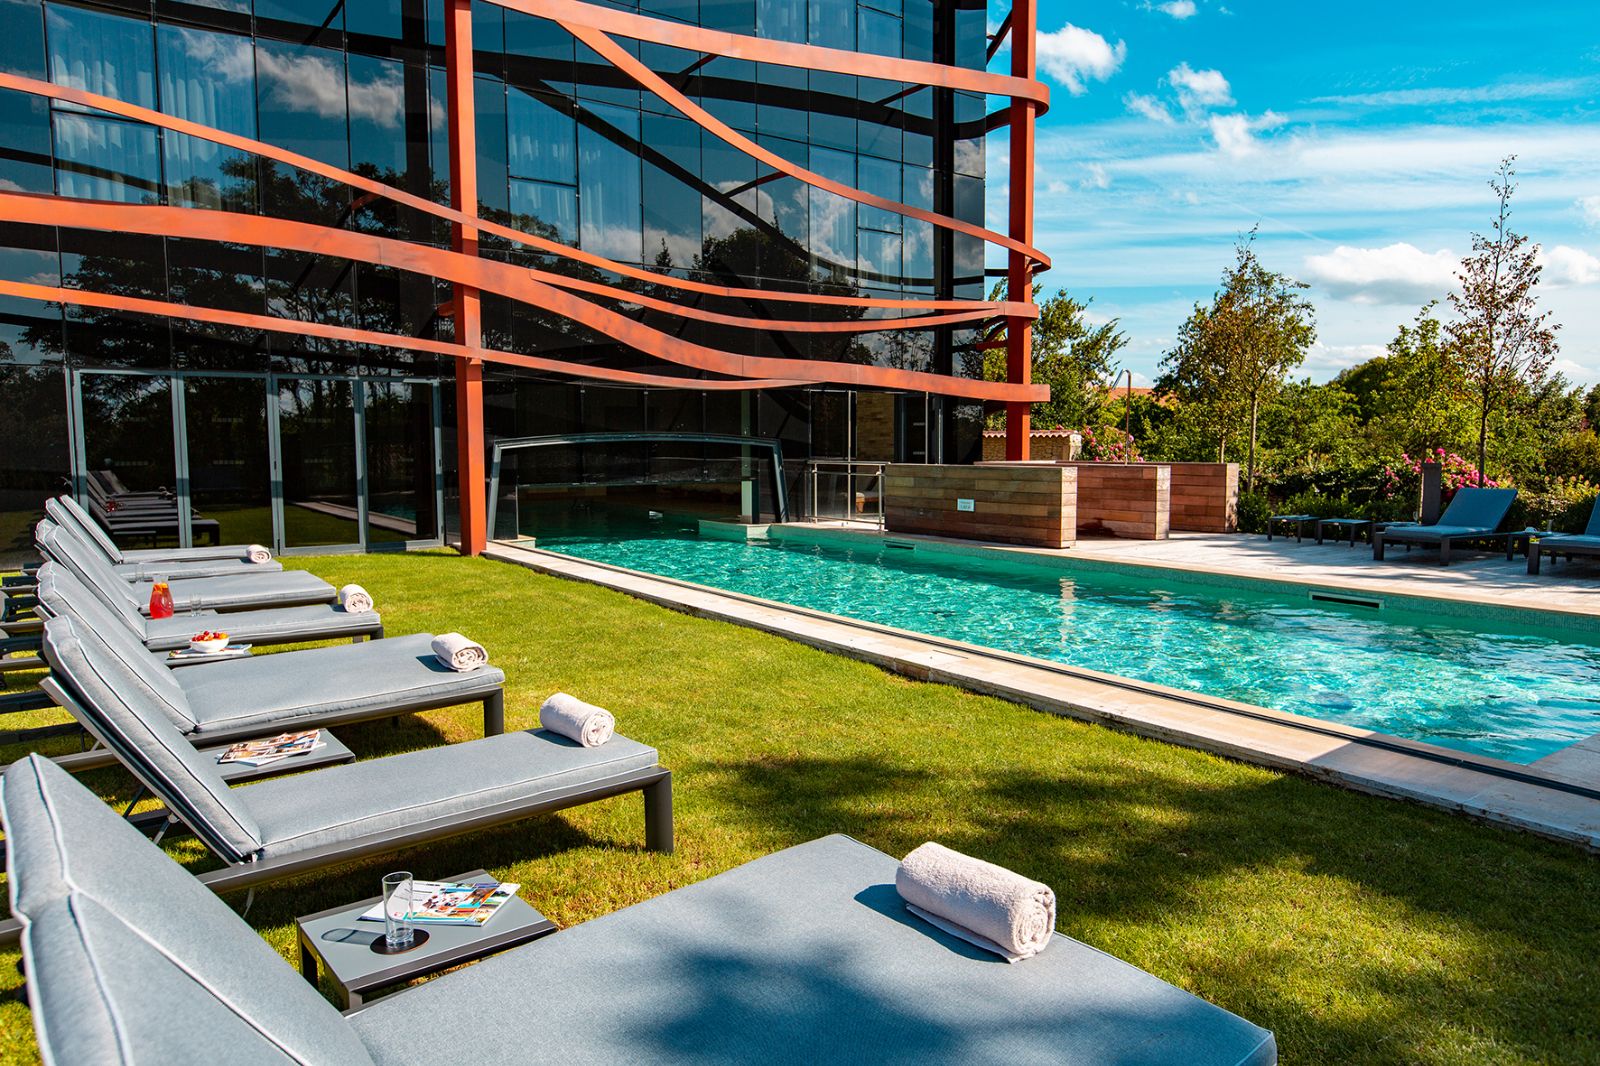 Outdoor pool area at Hotel Chais Monnet & Spa in South West France